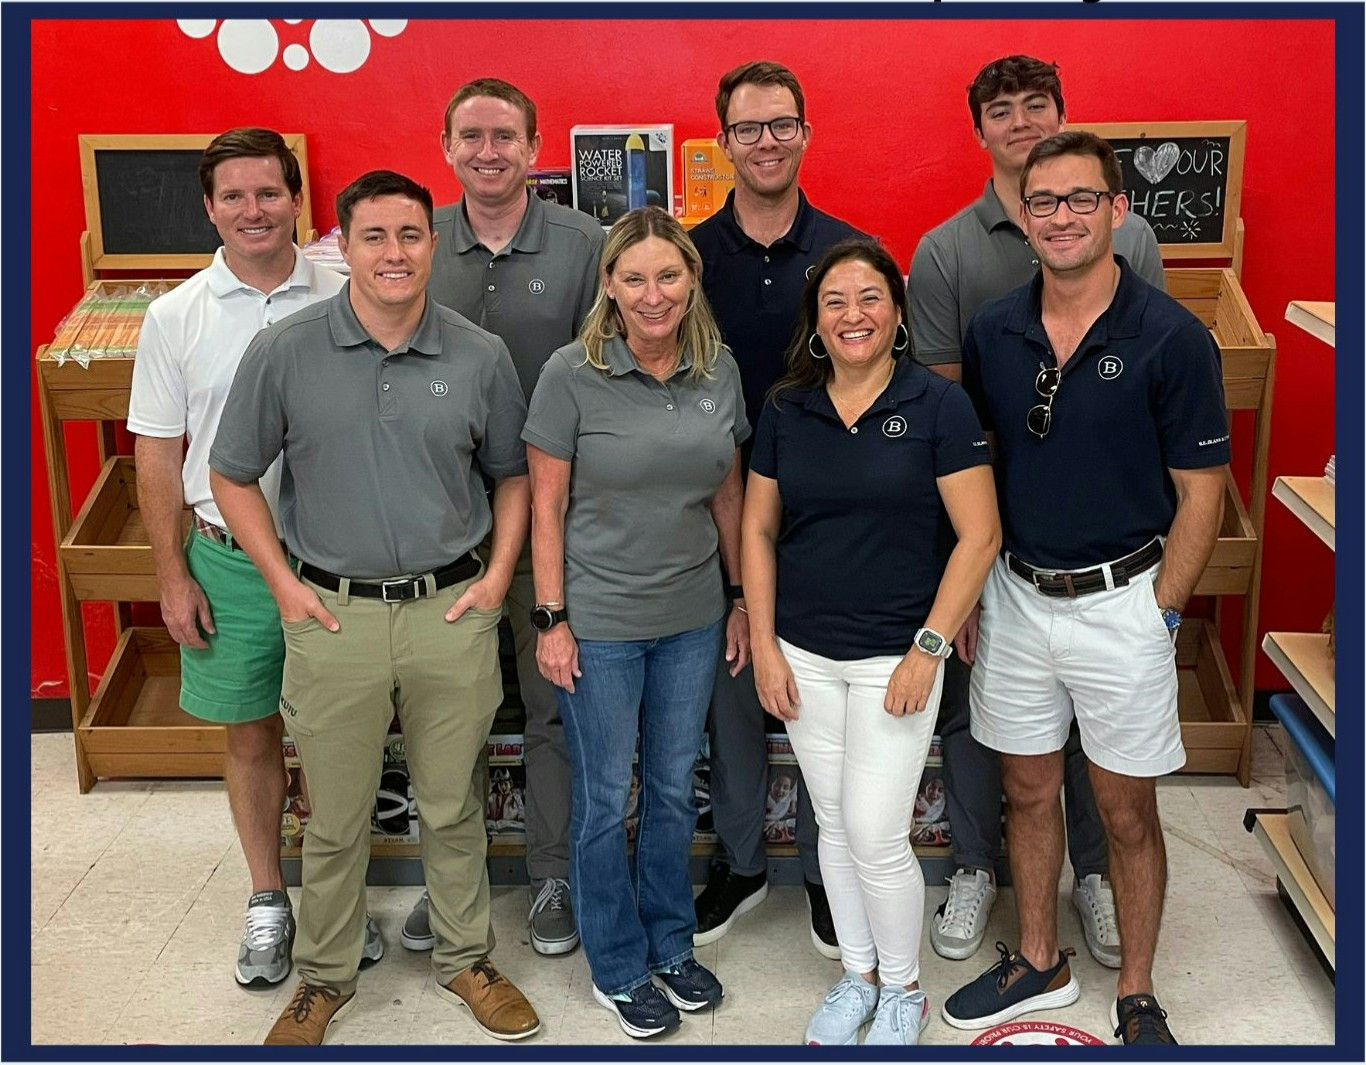 We volunteered at the Education Foundation of Palm Beach County packing backpacks for our back to school project.  